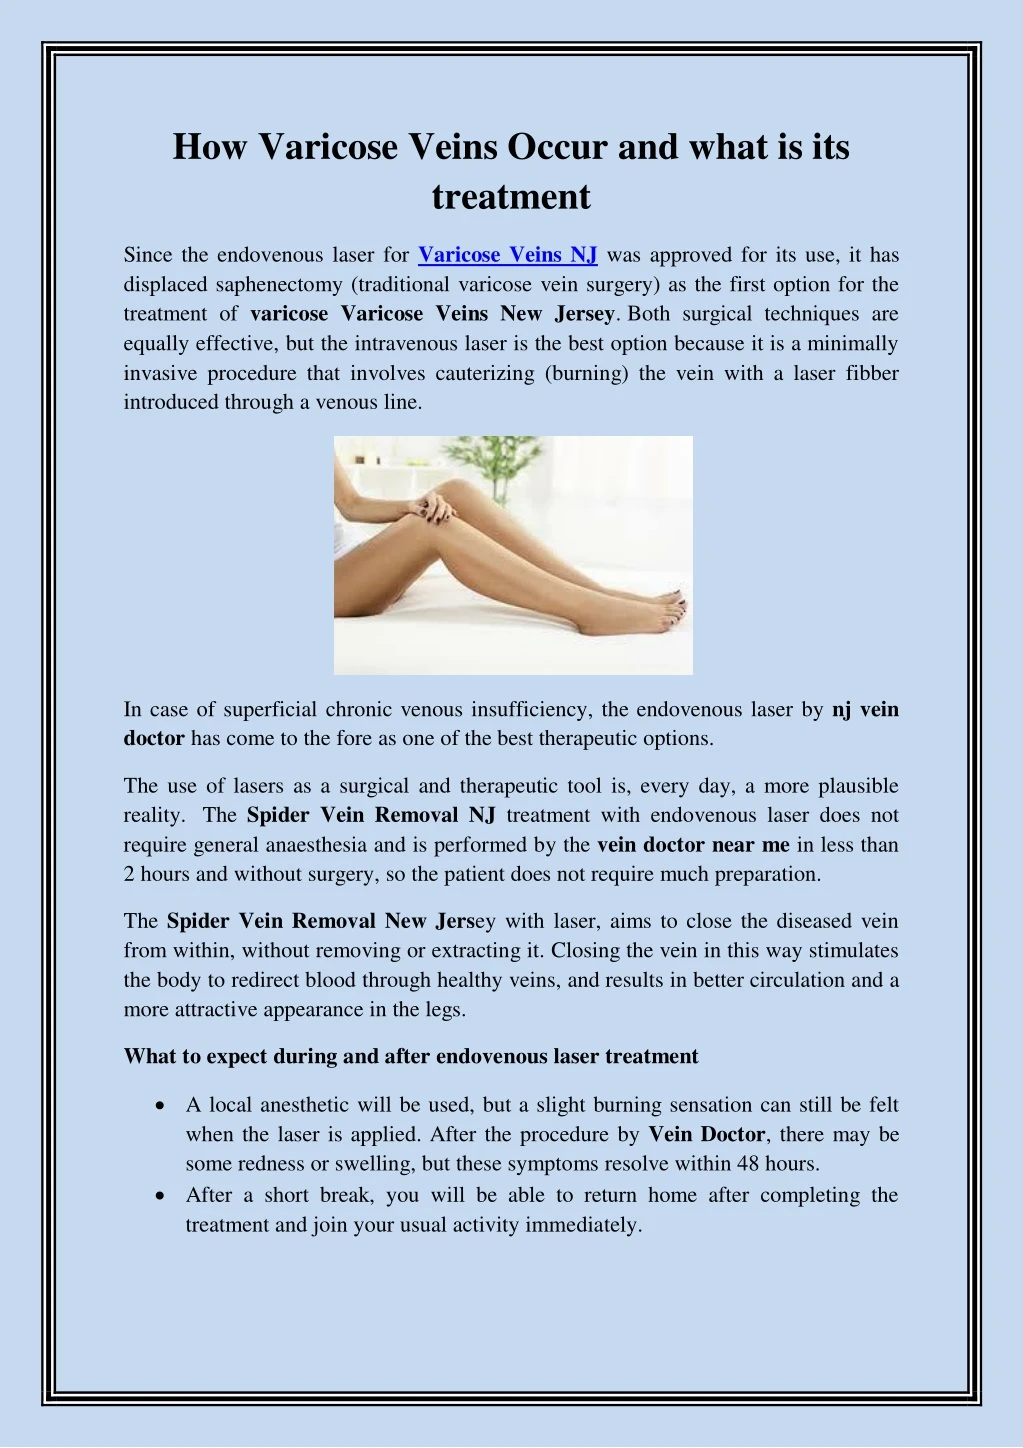 how varicose veins occur and what is its treatment